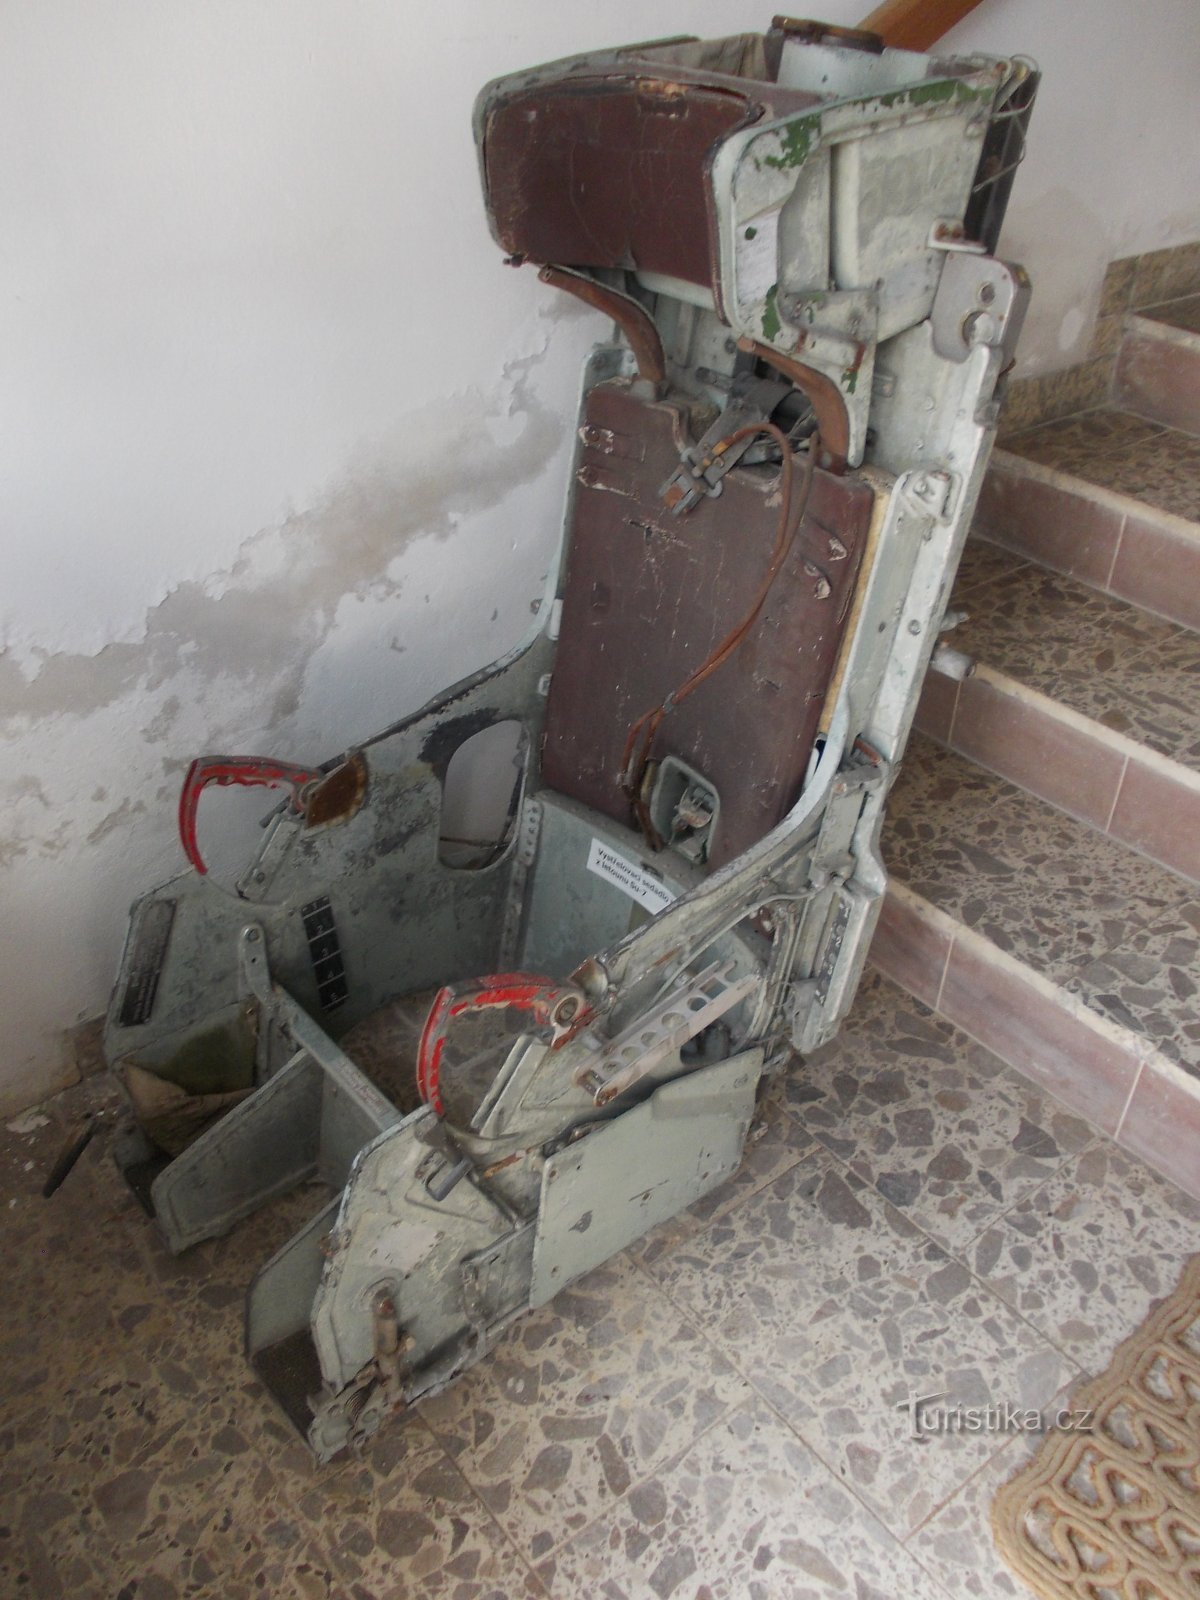 ejection seat from the Su - 7 machine